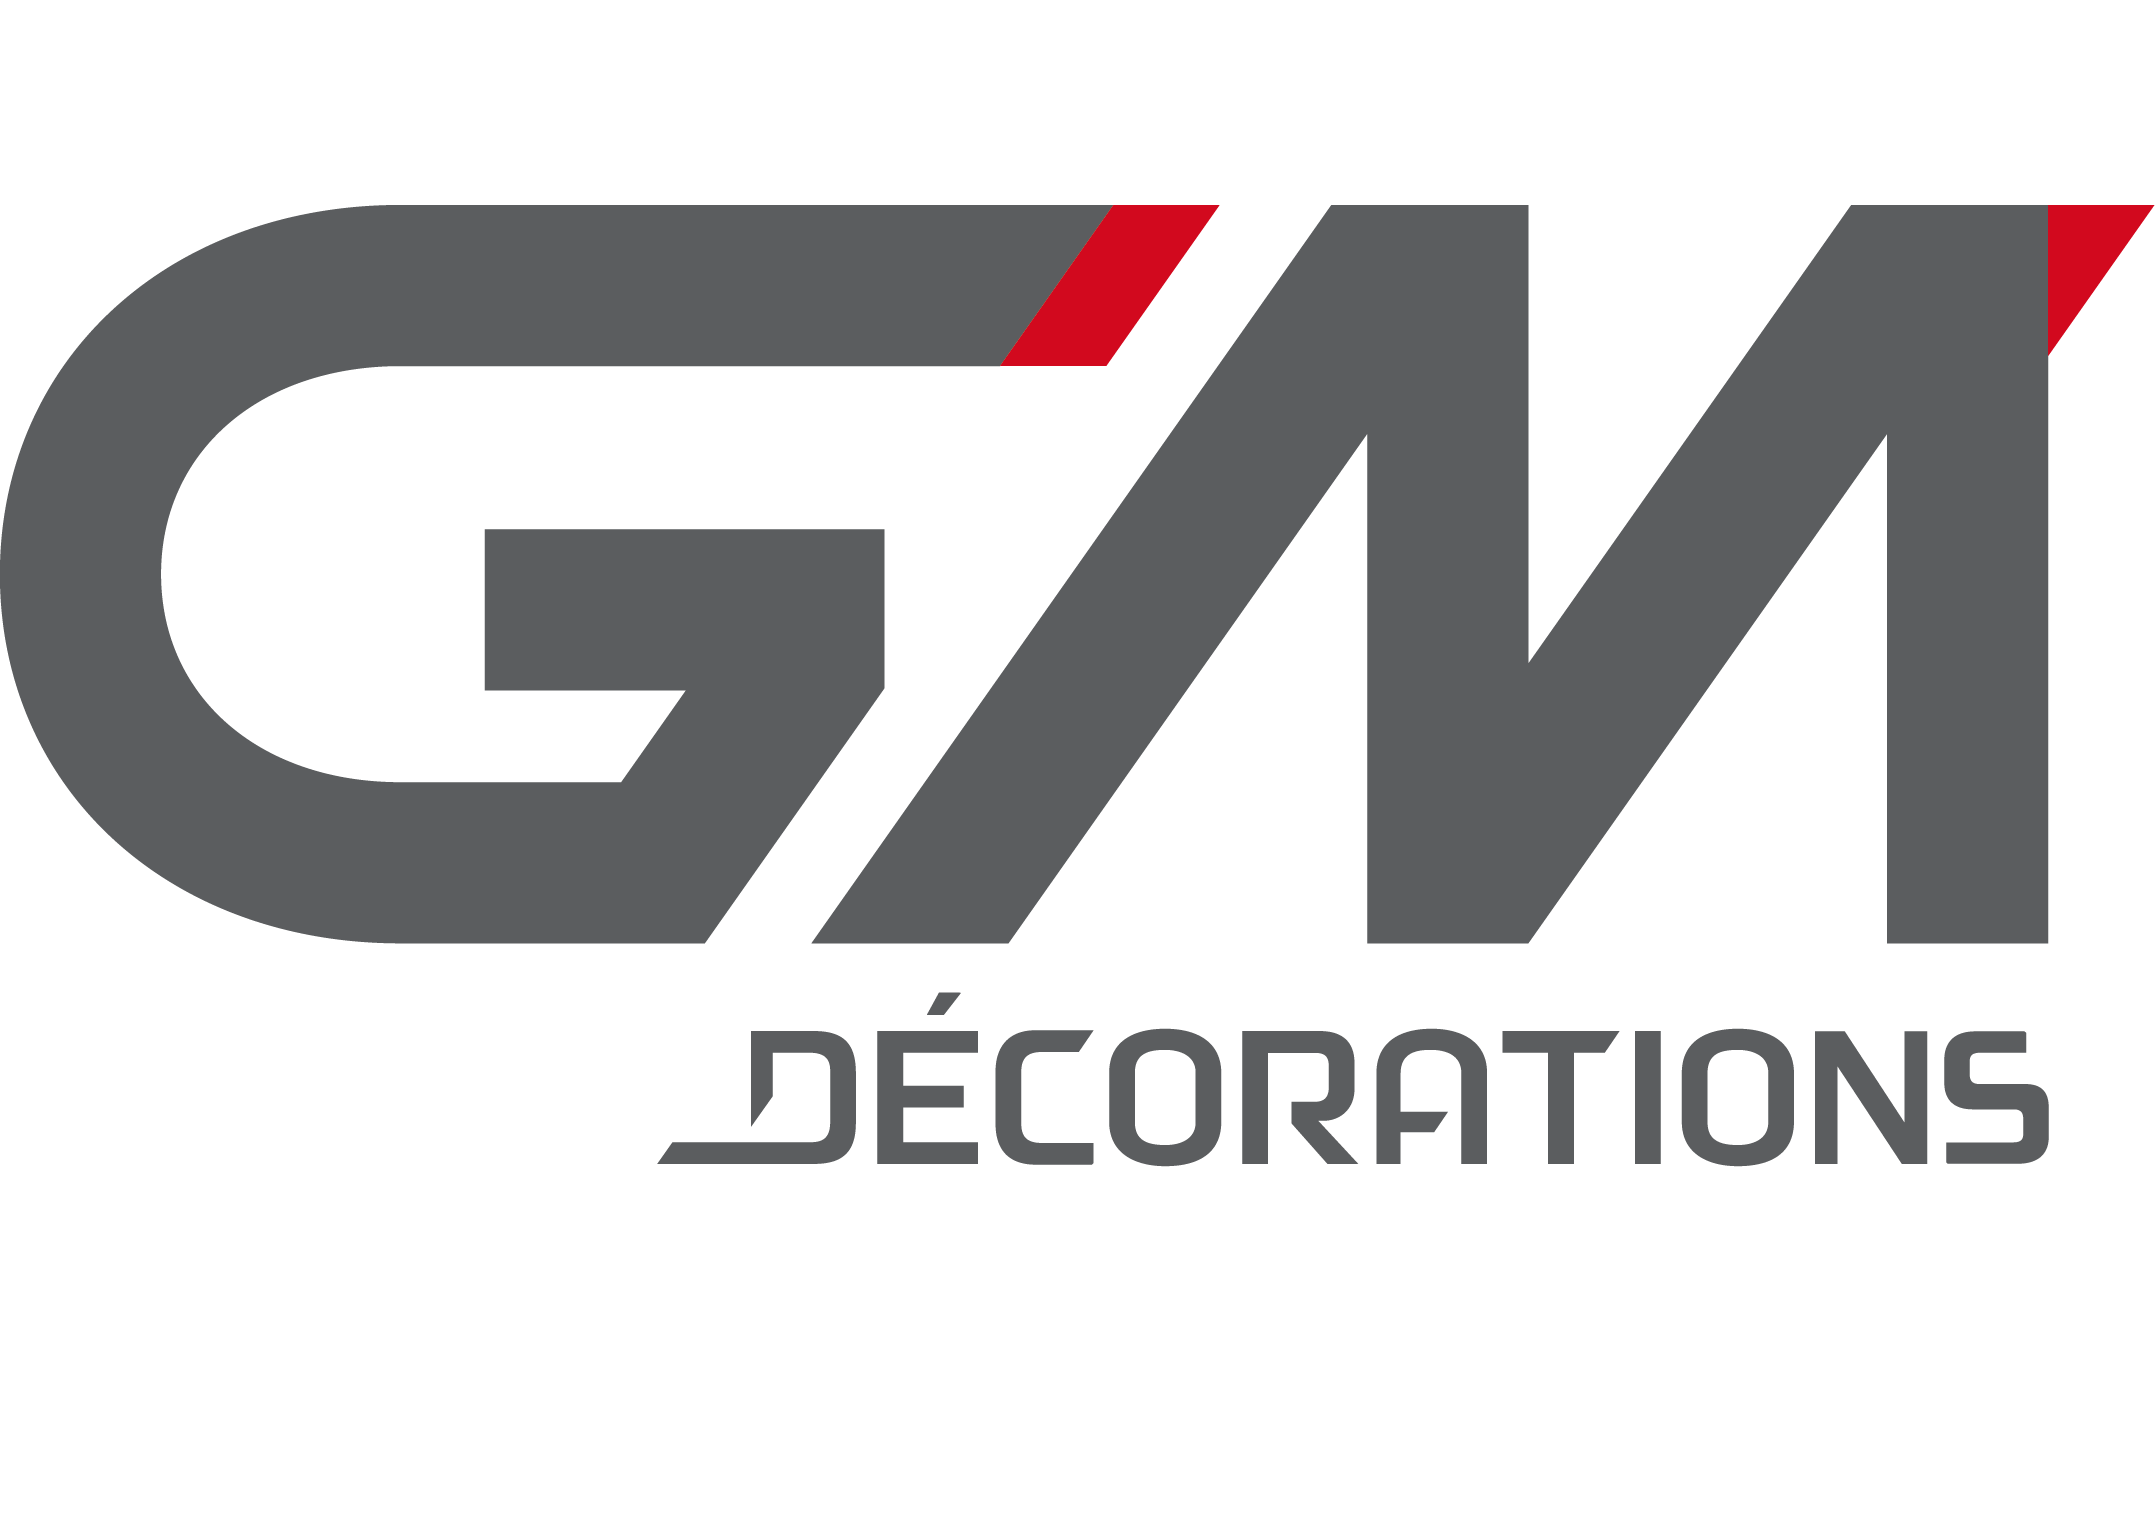 GMDecorationsSimpleVisible+Text